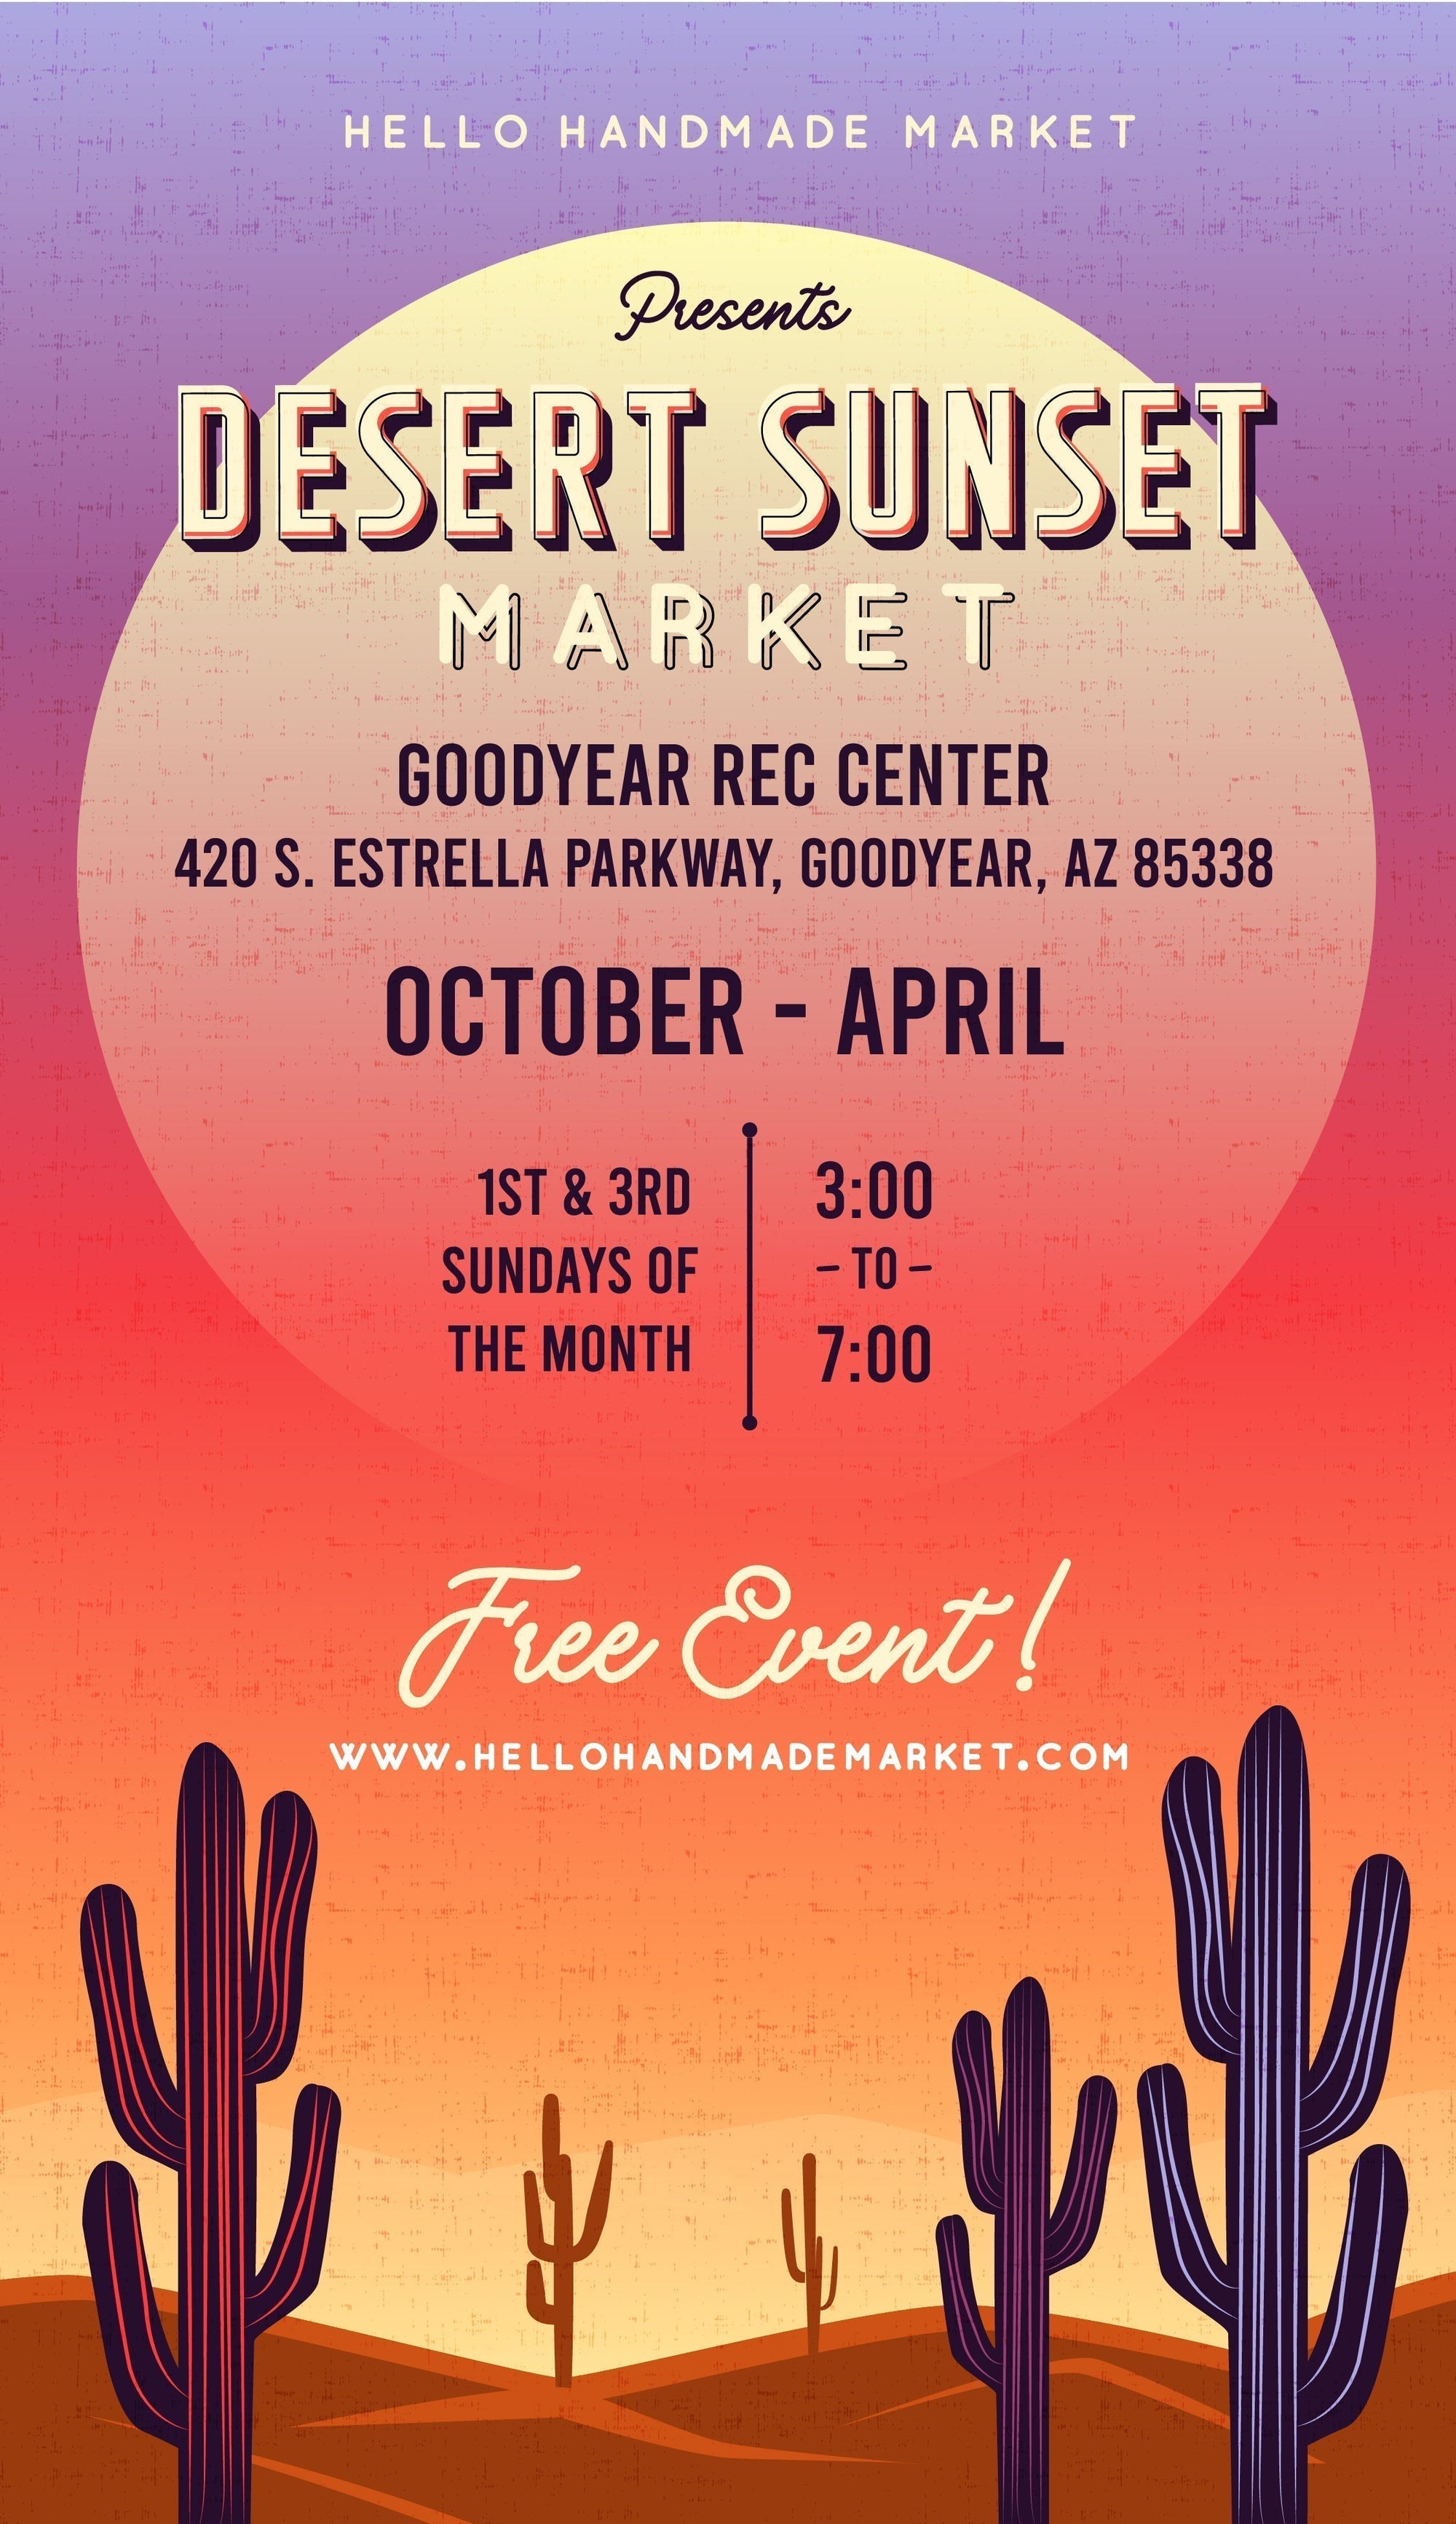 Be a Vendor on January 19, 2025 for the Desert Sunset Market at the Goodyear Recreation Center